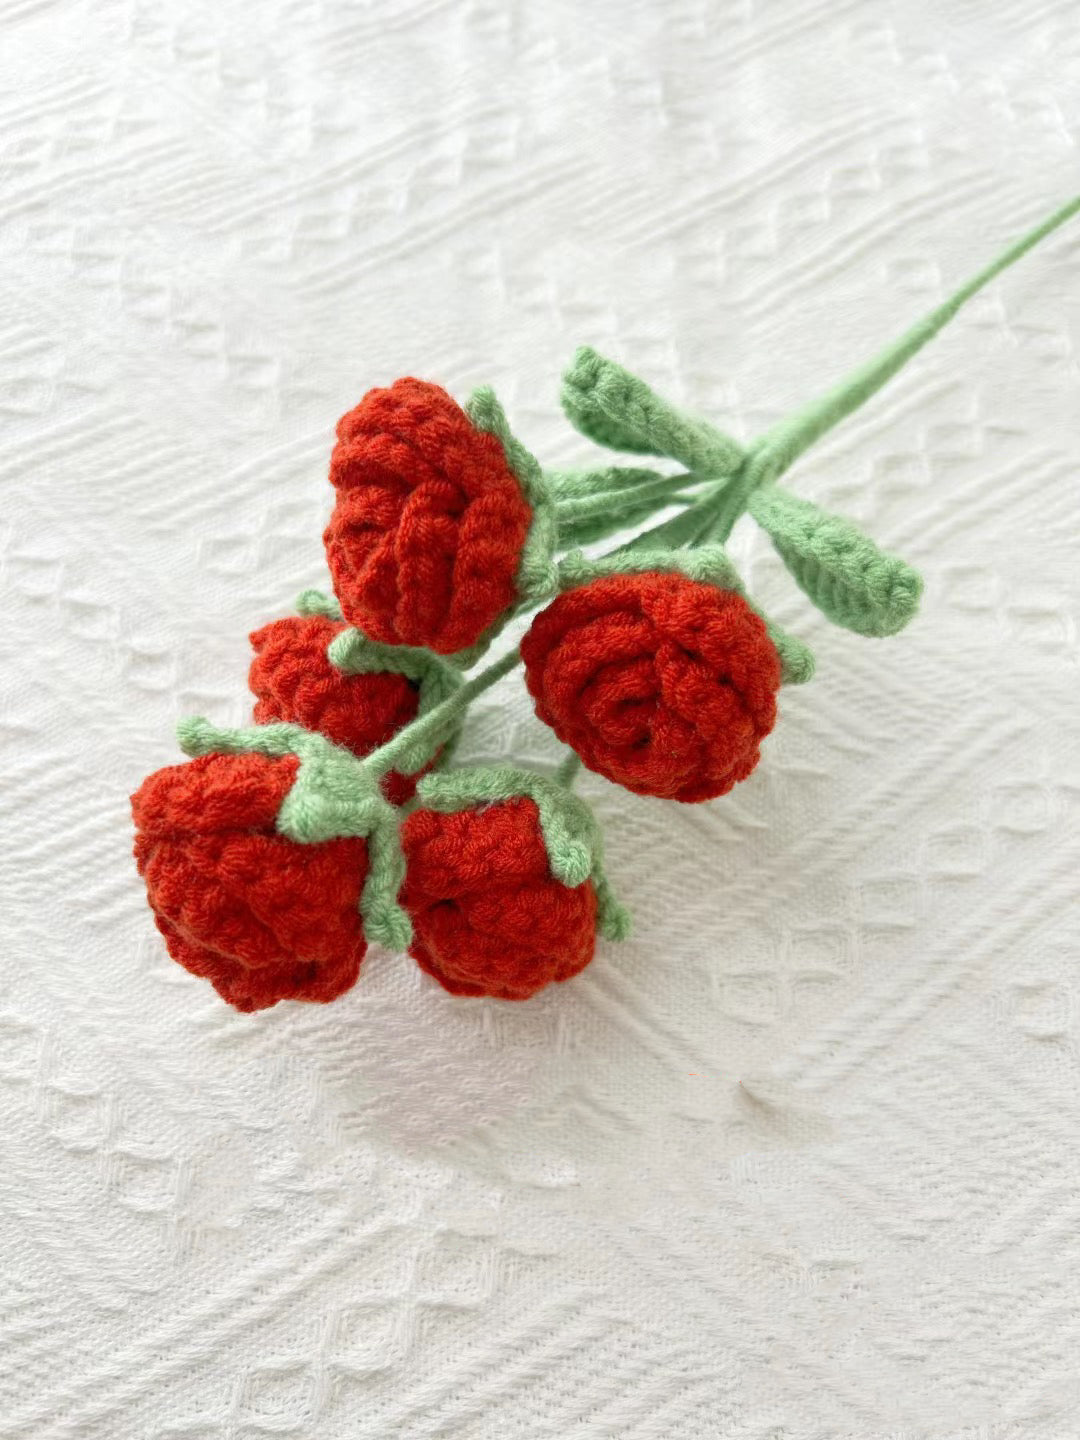 Lilyrosy Crochet bouquet Patterns package,English pdf pattern with video (10 in 1 package)